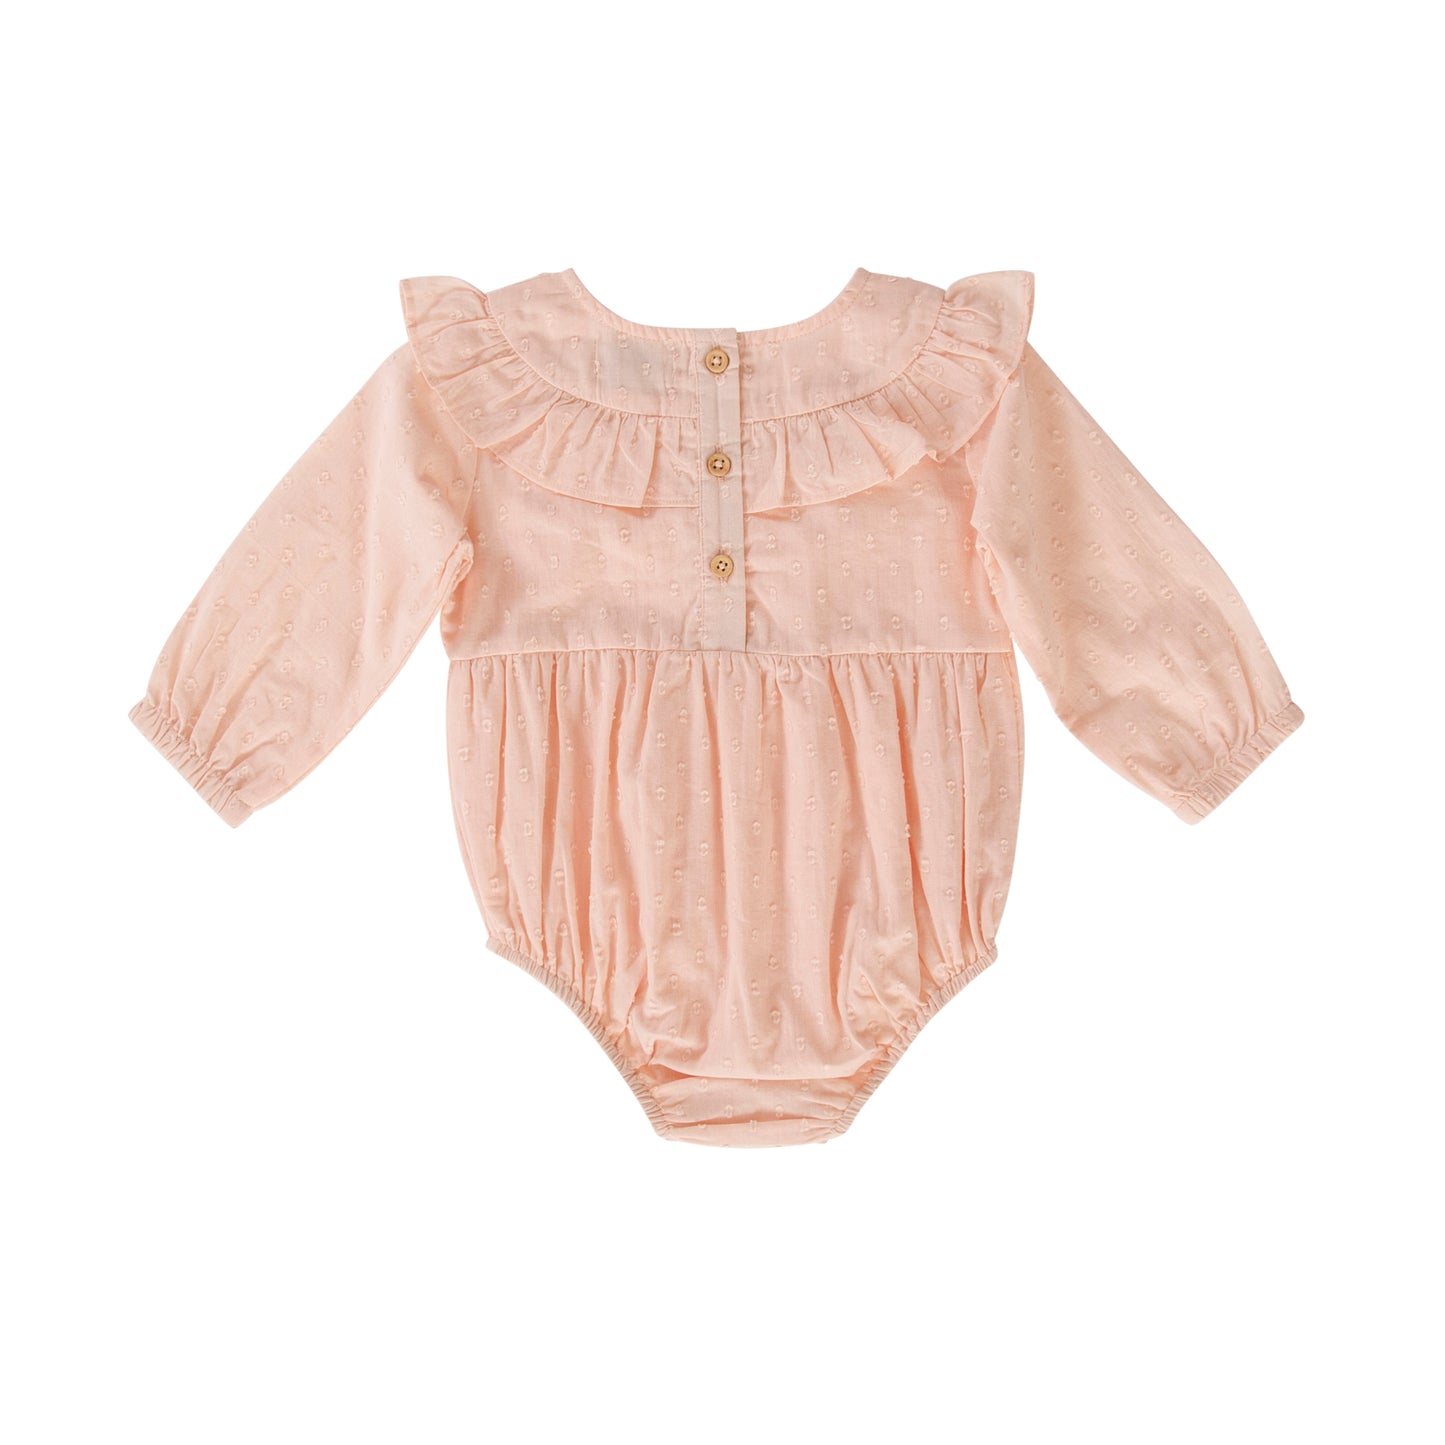 Sydney Playsuit in pale pink